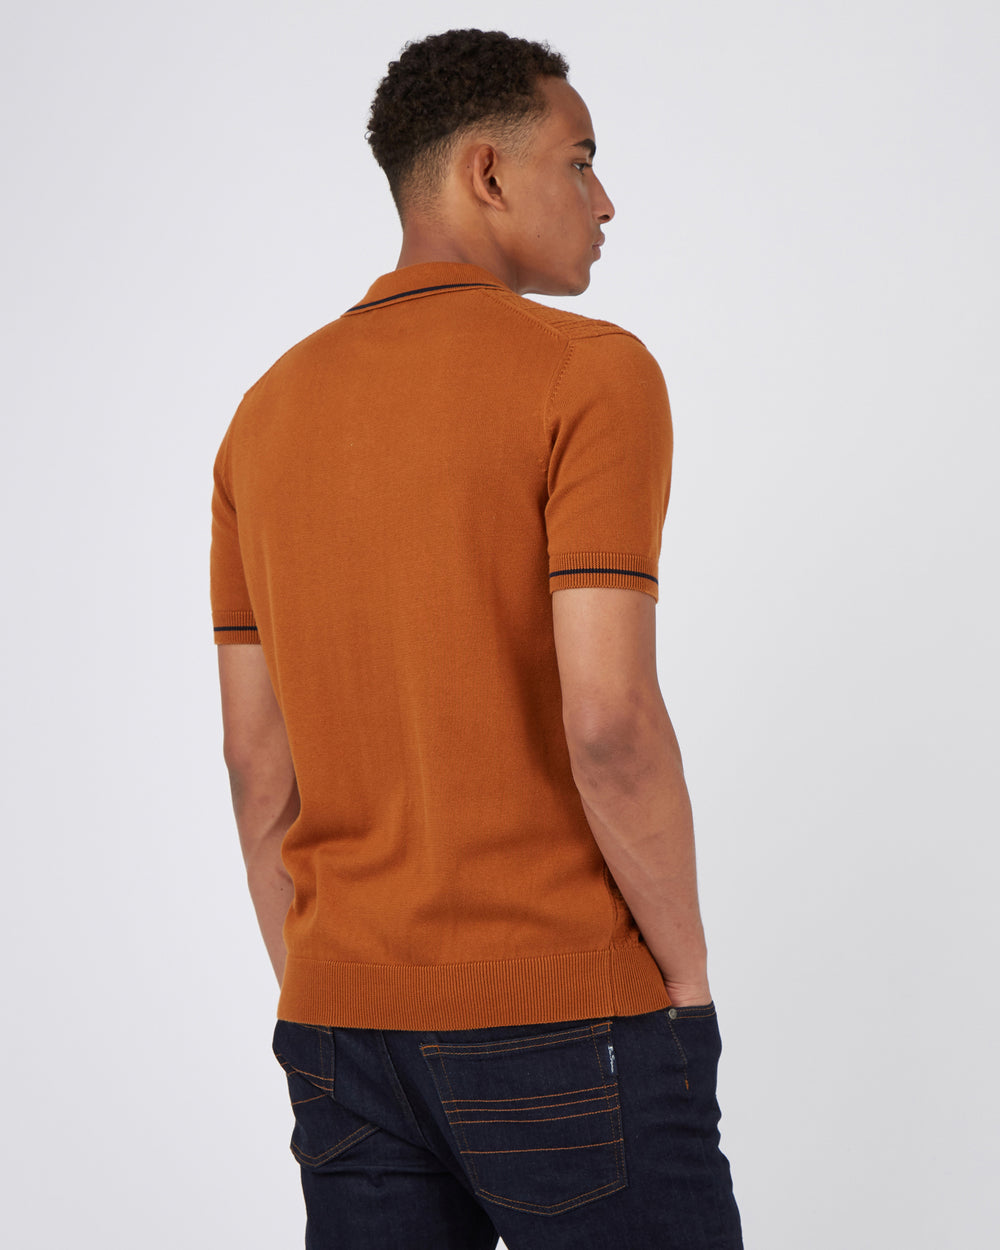 Short-Sleeve Textured-Front Knit Polo - Caramel